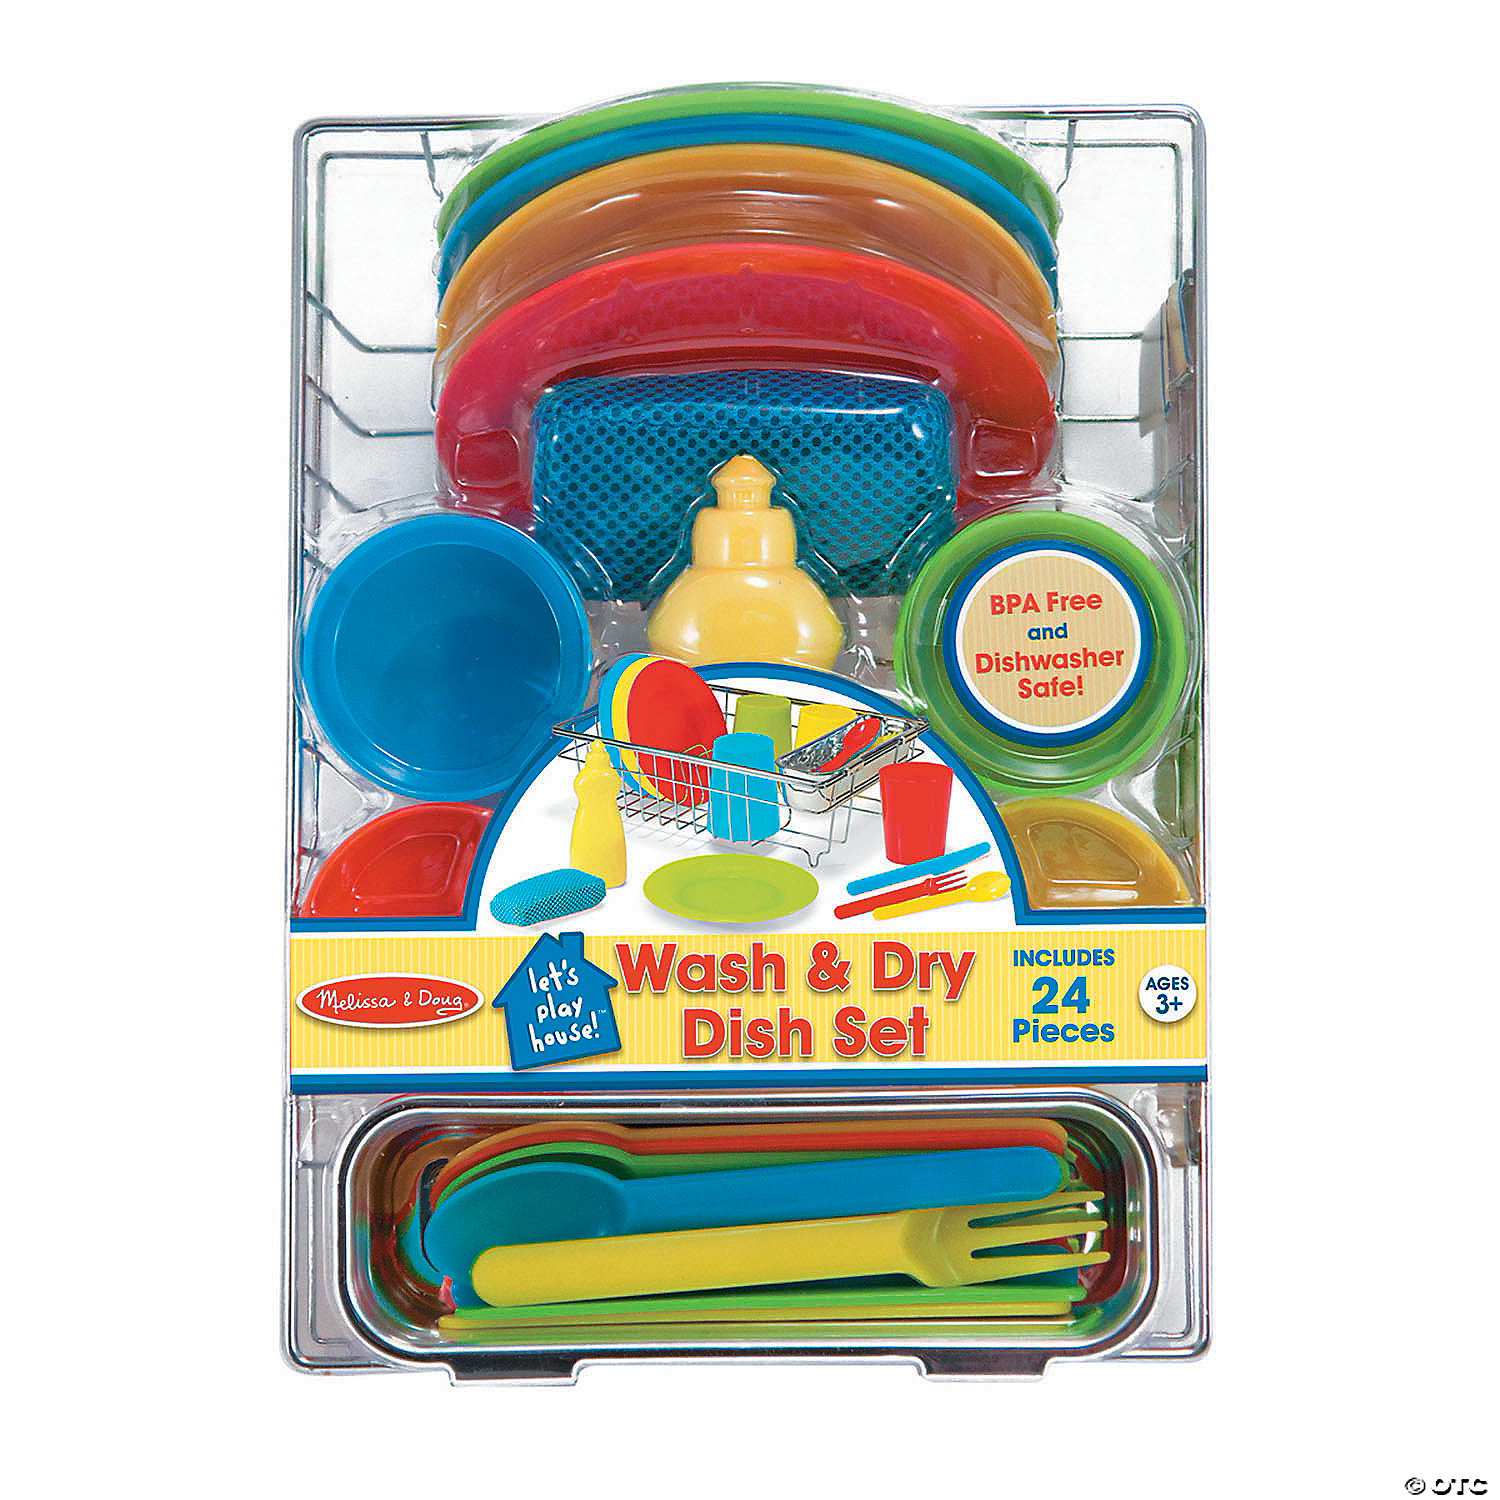 Wash & Dry Dish Set Melissa & Doug Let’s Play House 10.16 cm H x 29.21 cm W x 21.59 cm L 4 Place Settings Use with Kitchen Set or Stand-Alone 24 Pieces 